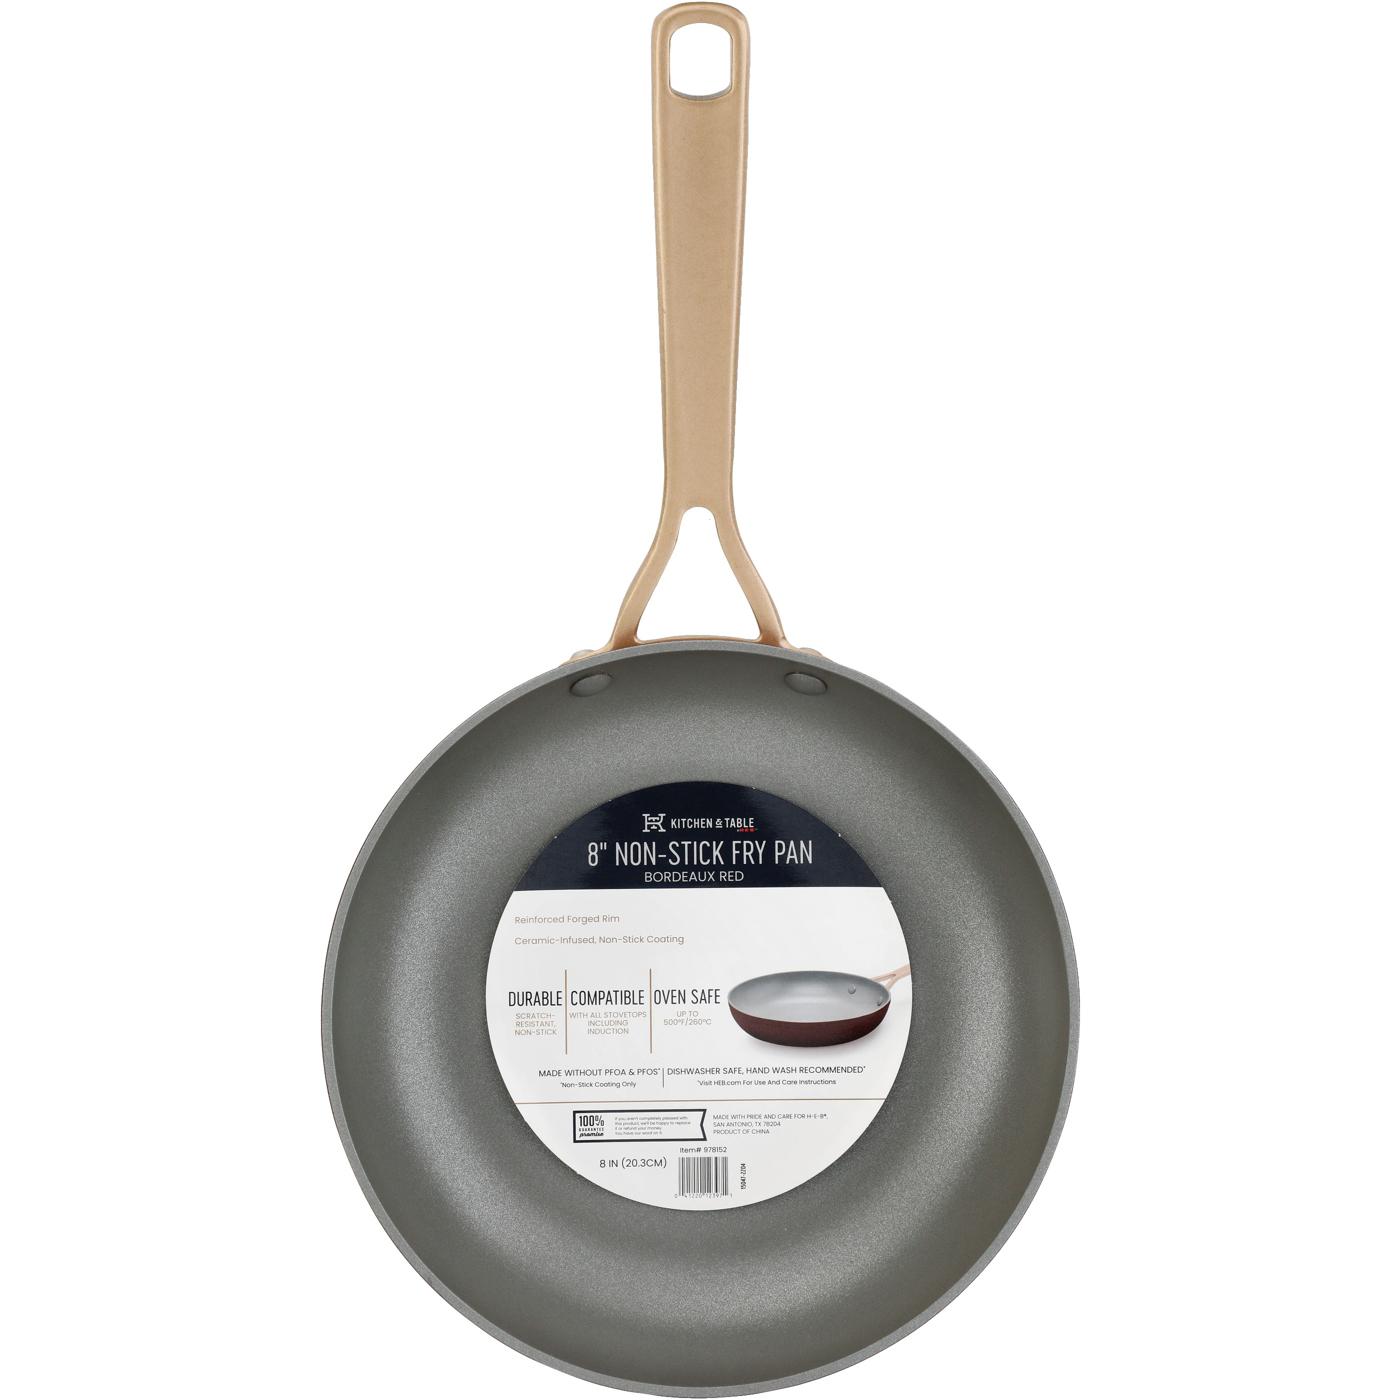 Kitchen & Table by H-E-B Non-Stick Fry Pan - Bordeaux Red; image 6 of 6